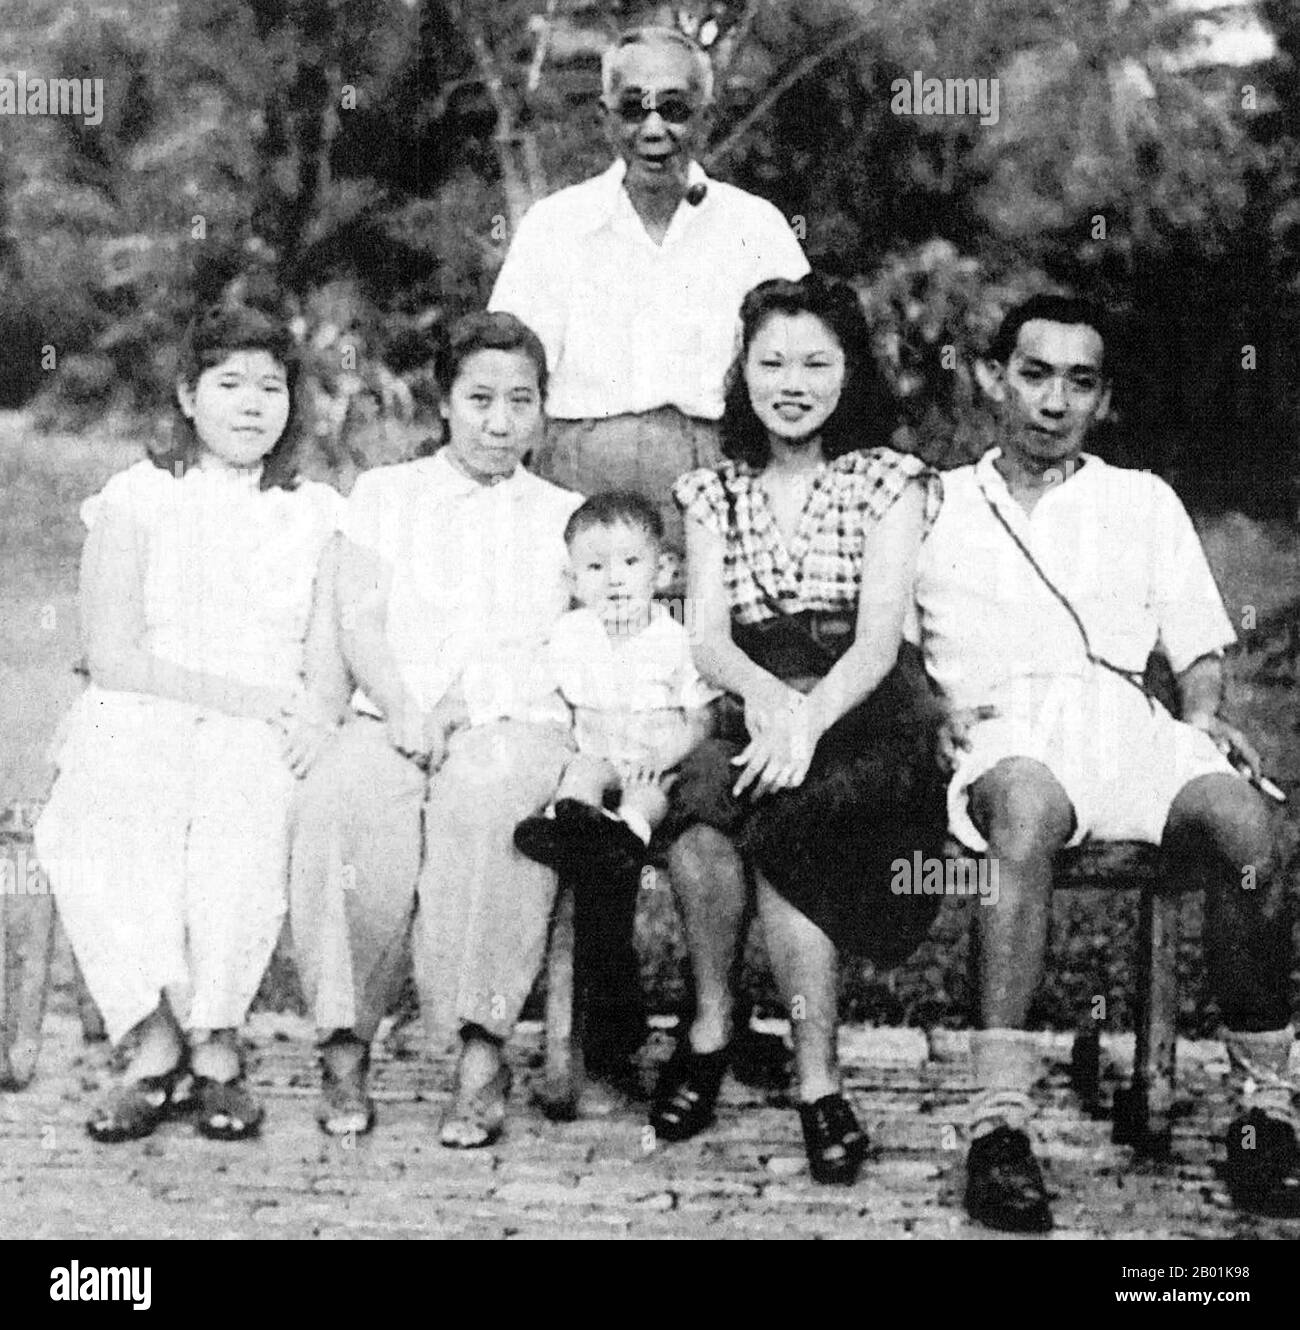 Singapore: Goh Keng Swee (6 October 1918 - 14 May 2010), Deputy Prime Minister of Singapore (r. 1973-1984) with his family as a young child, c. 1920.  Goh Keng Swee was the second Deputy Prime Minister of Singapore between 1973 and 1984, and a Member of Parliament for the Kreta Ayer constituency for a quarter of a century.  Born in Malacca in the Straits Settlements into a Peranakan family, he came to Singapore at the age of two years. Educated at Raffles College and the London School of Economics and Political Science, his interest in politics began during his time in London. Stock Photo